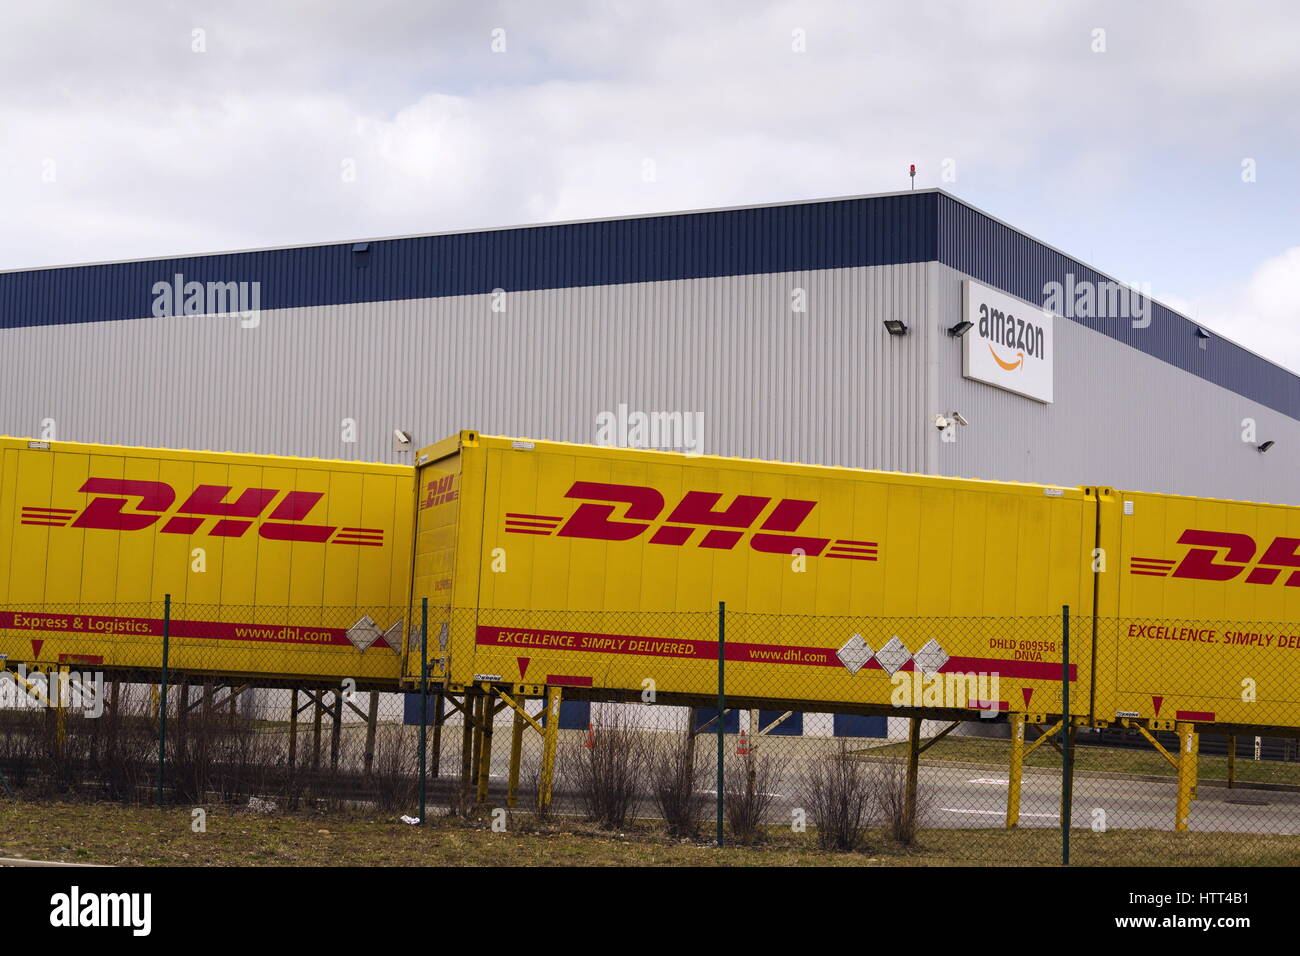 DOBROVIZ, CZECH REPUBLIC - MARCH 12: DHL shipping containers in front of Amazon logistics building on March 12, 2017 in Dobroviz, Czech republic. Stock Photo